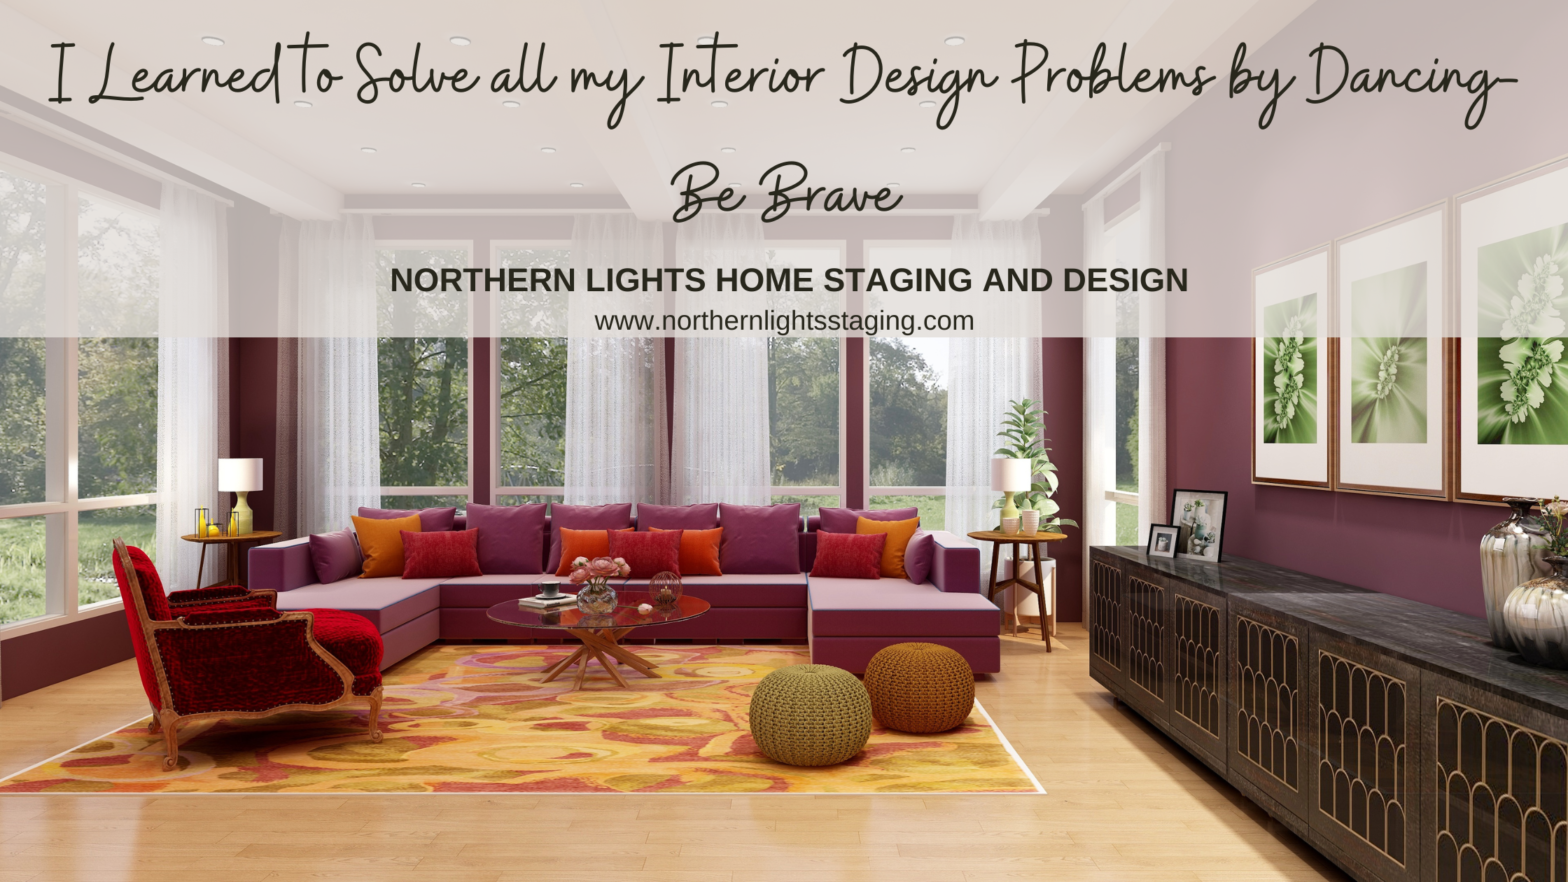 I Learned to Solve All My Interior Design Problems by Dancing- Be Brave.